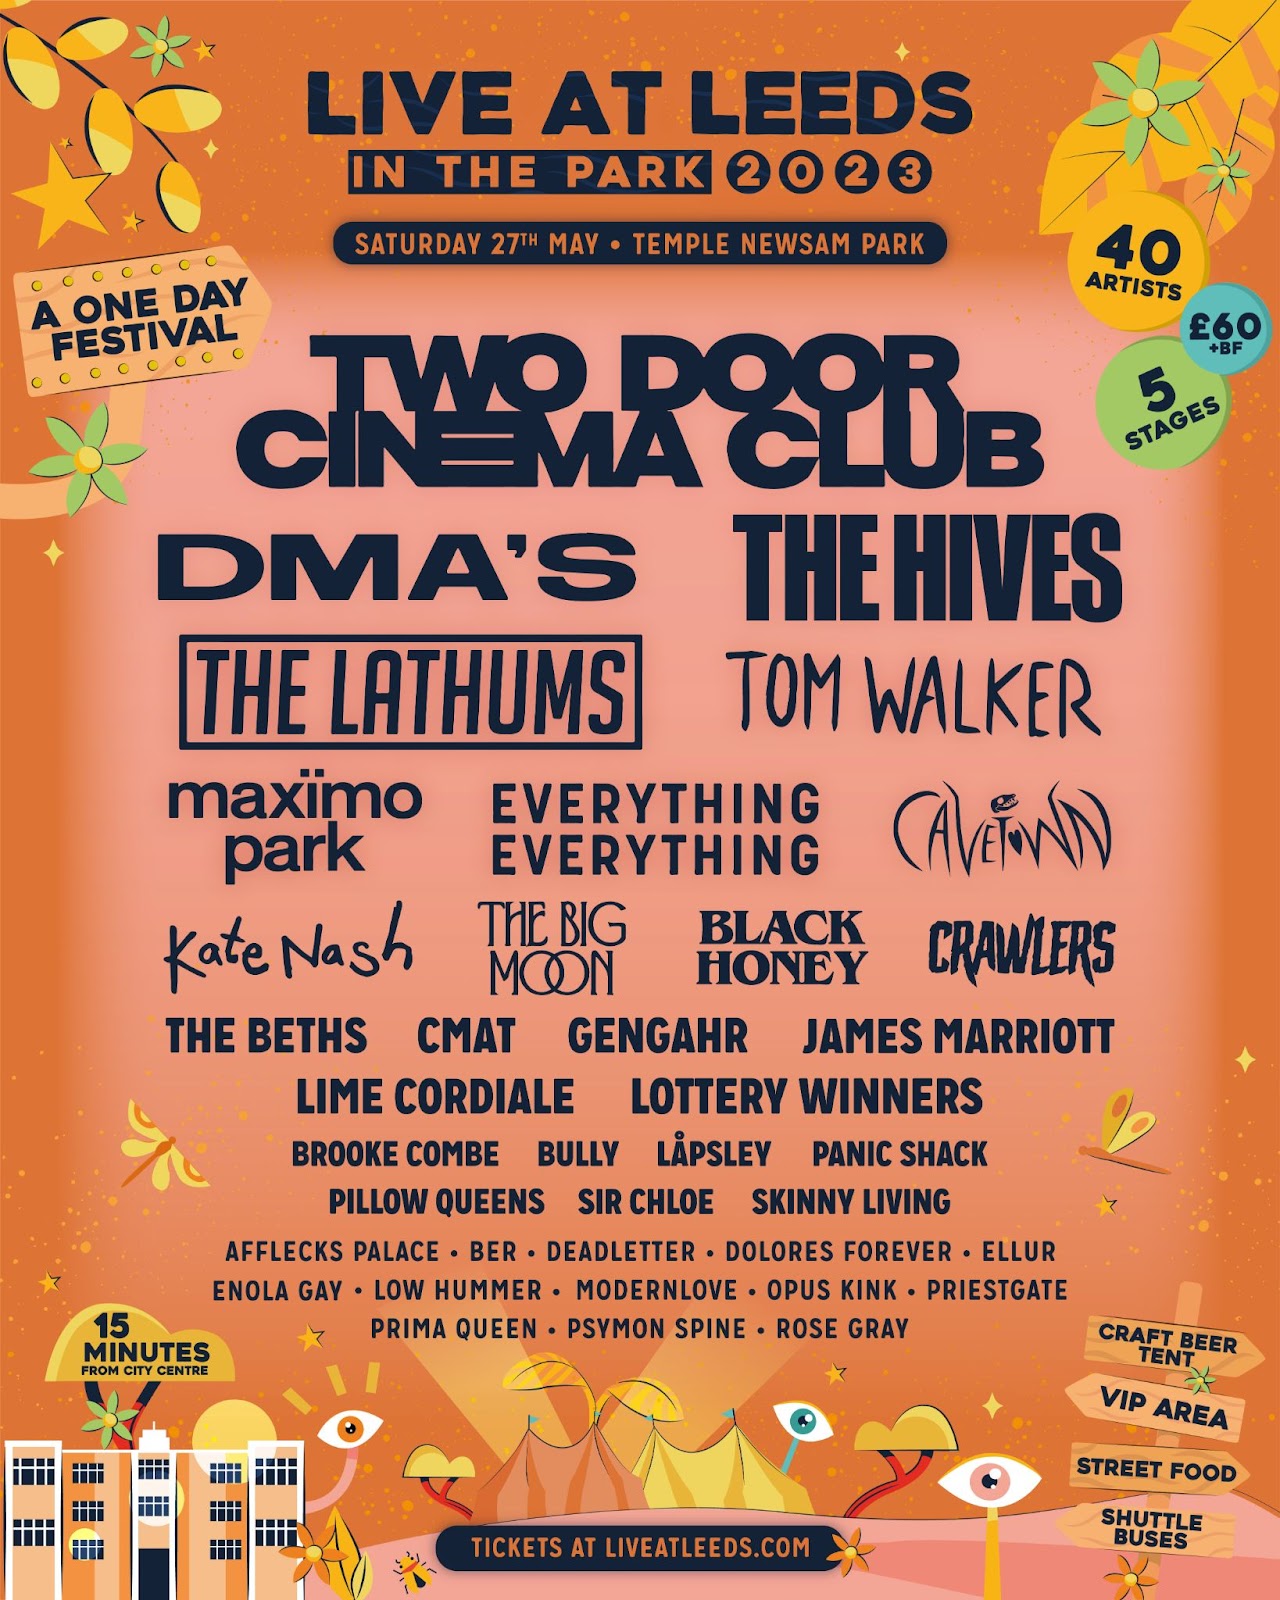 The Live at Leeds line-up